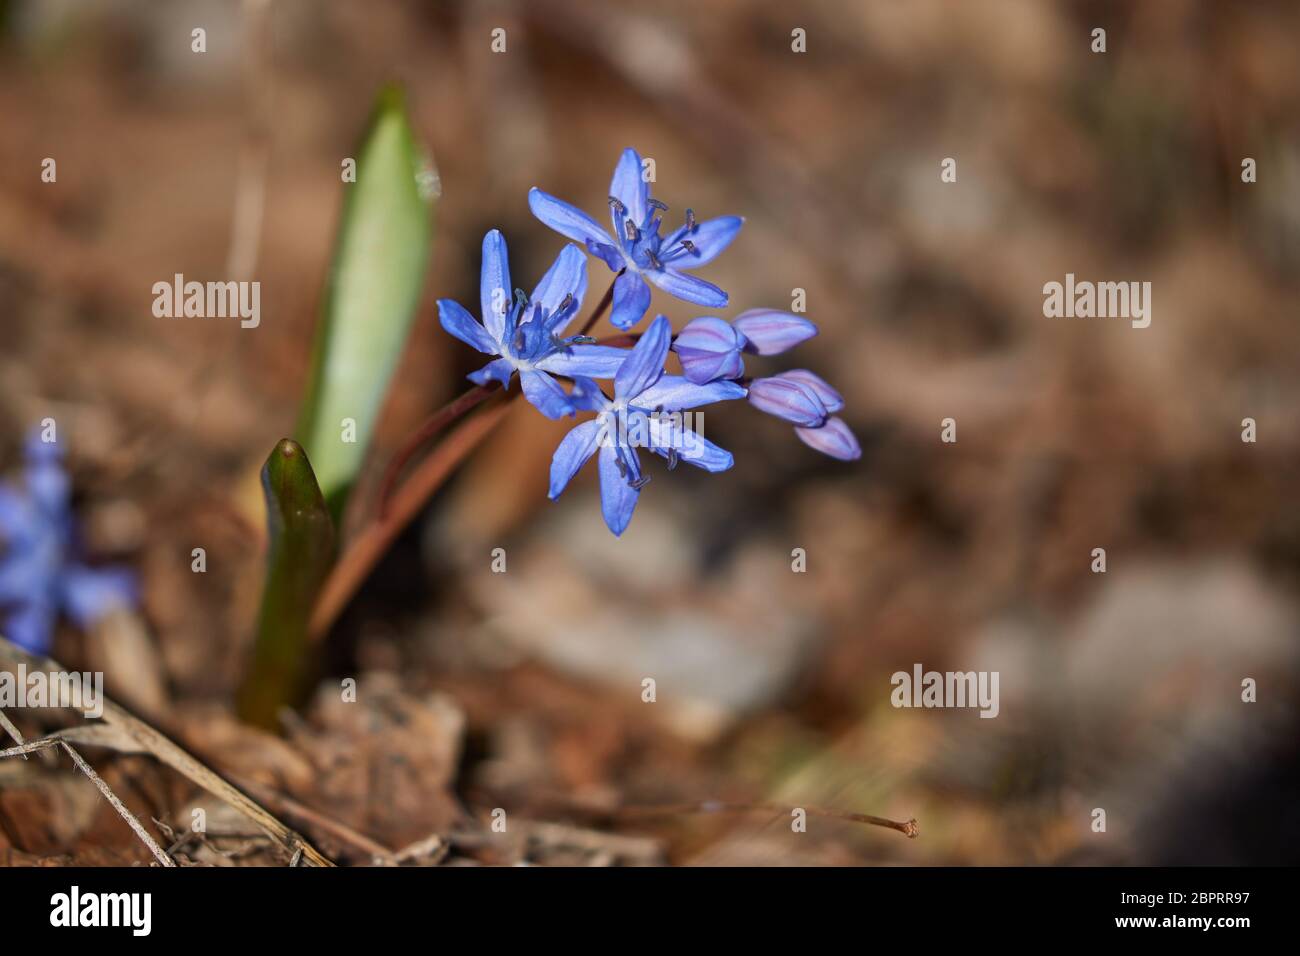 Scilla flowers native to the Bukk mountains in Hungary Stock Photo